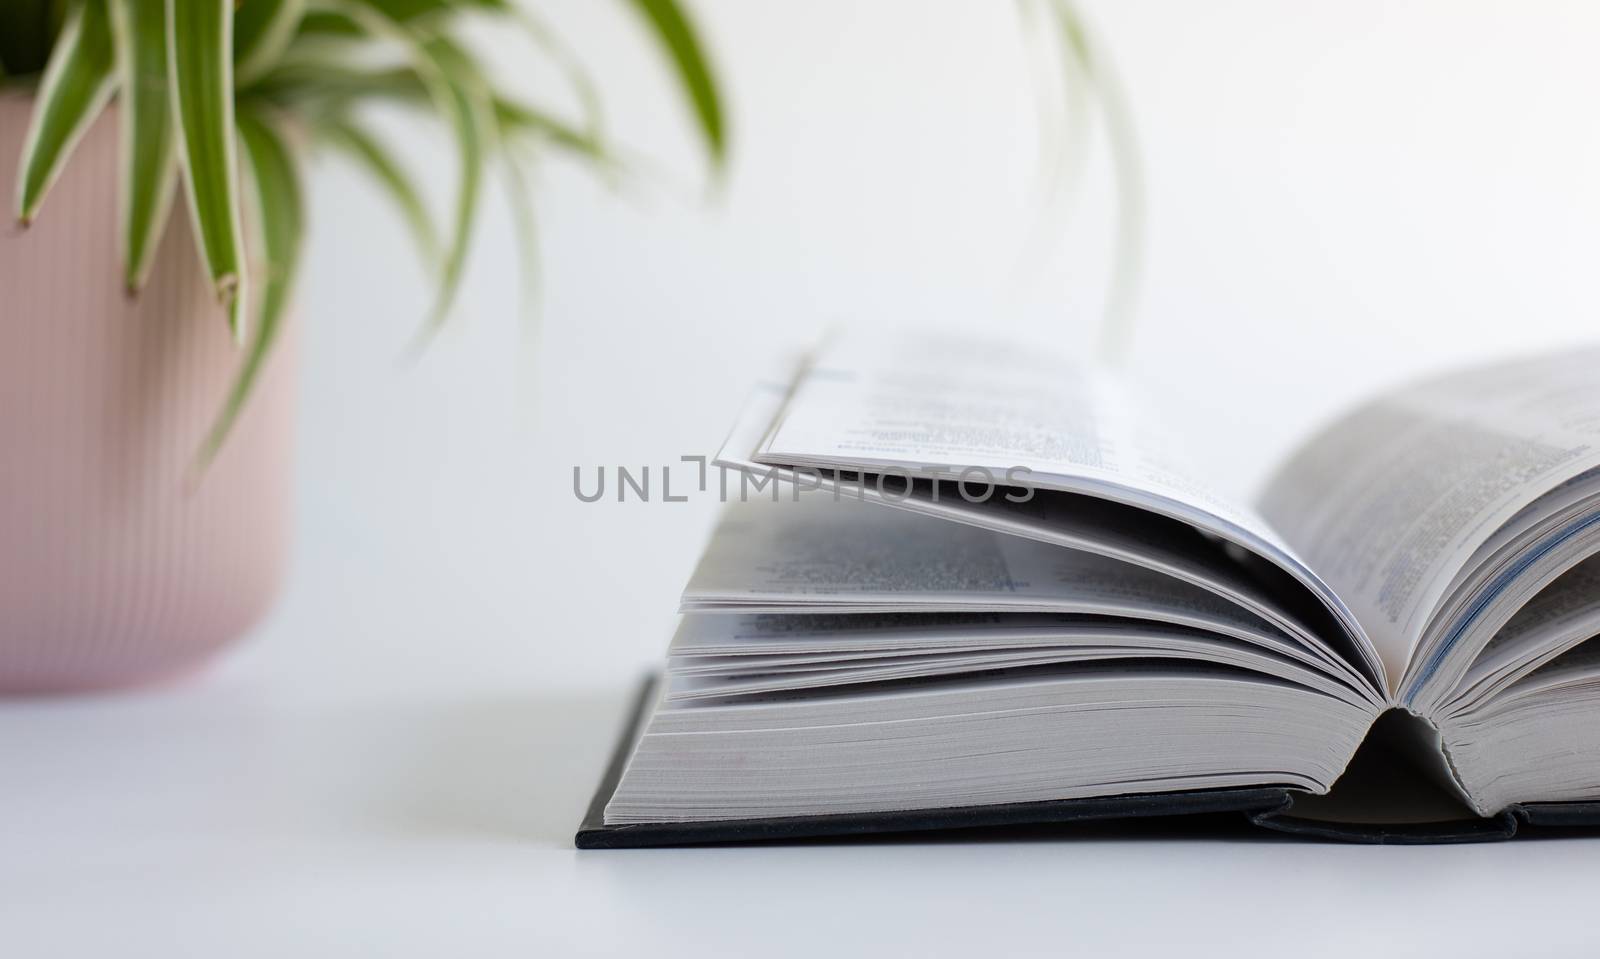 Open book, home plant in soft focus on white background. Stay at home, freelance, learning from home concept. Self care, time away from technology, finding quiet place with book.